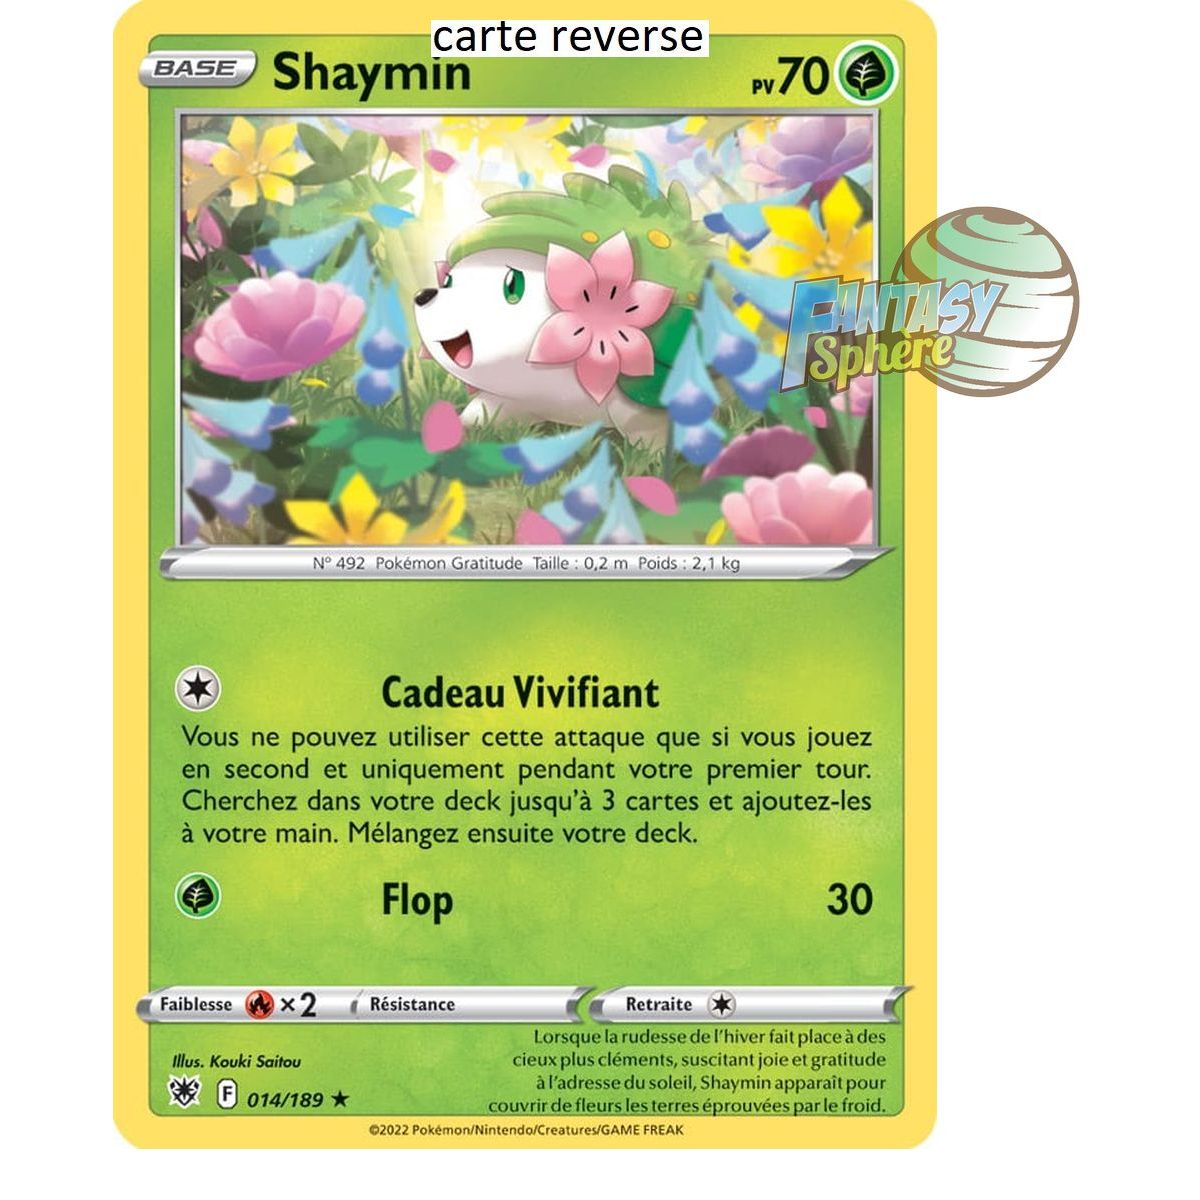 Shaymin - Reverse 14/189 - Epee et Bouclier 10 Astres Radieux